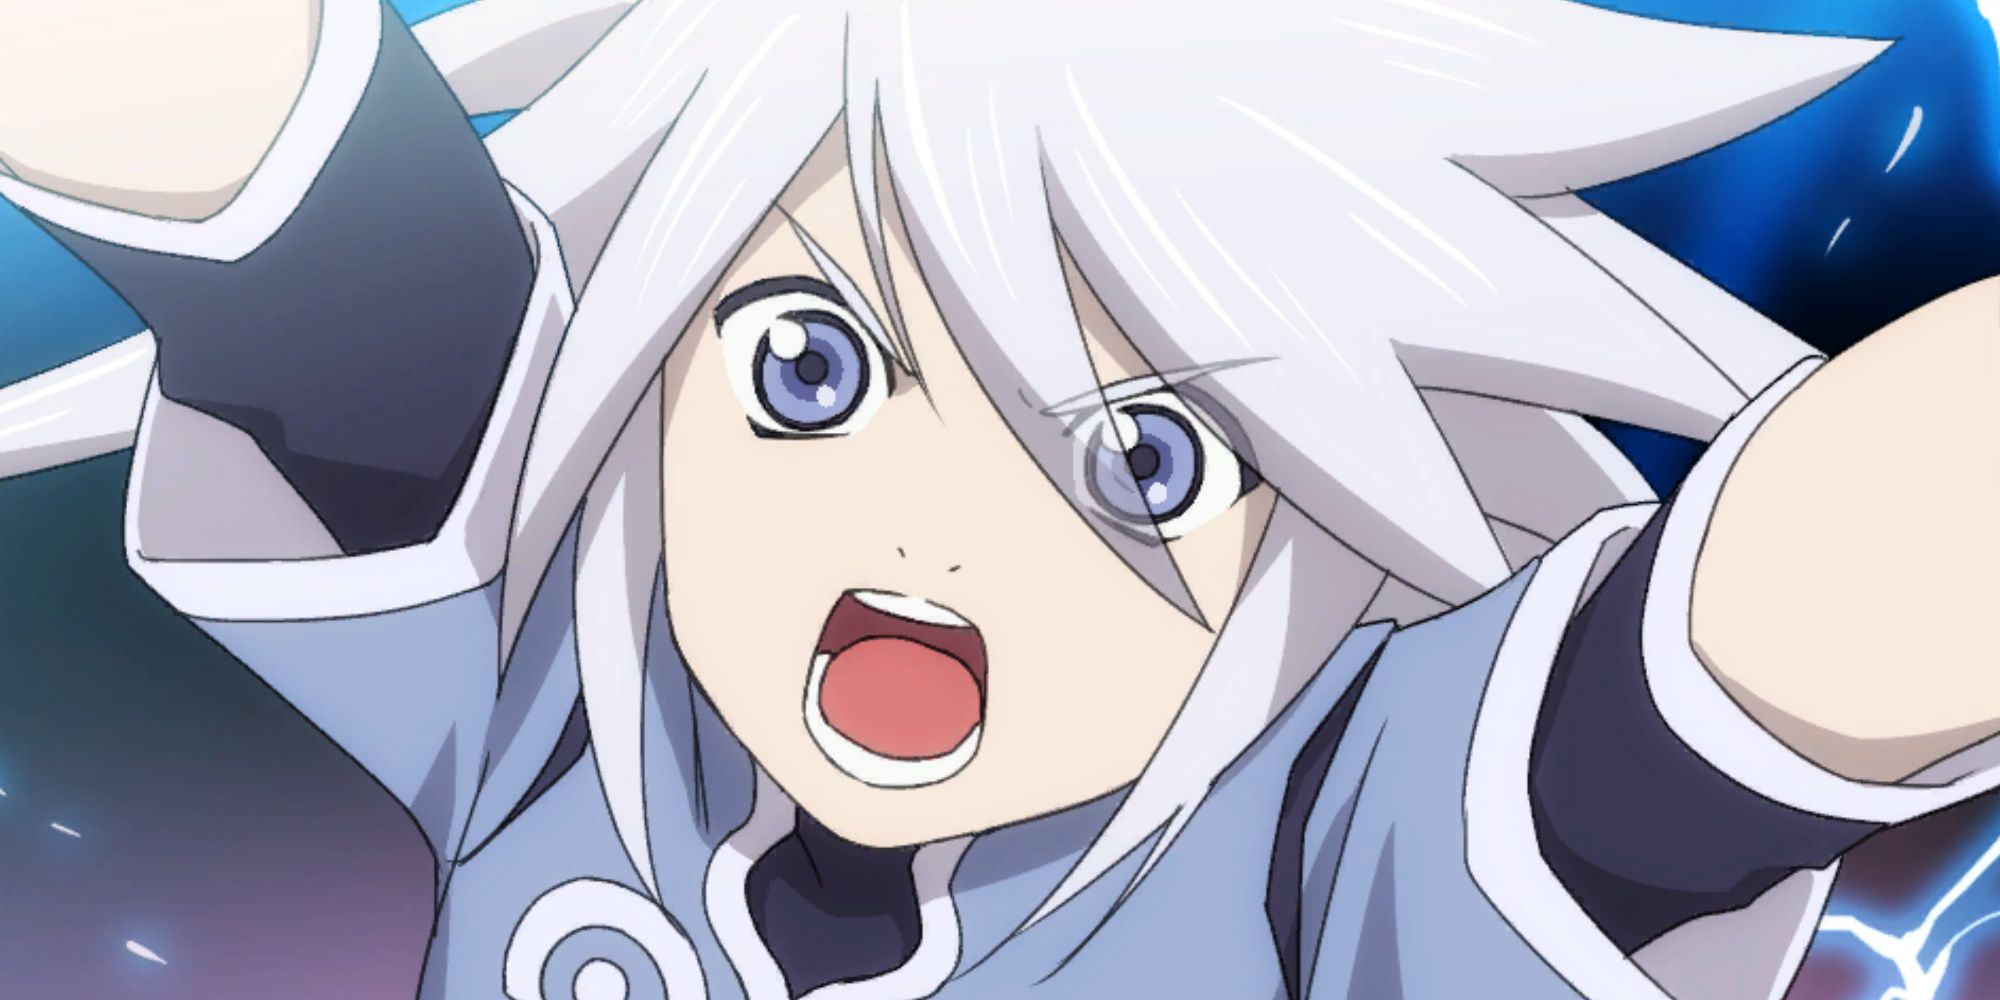 An image of Genis' Mystic Arte cut-in from Tales of Symphonia Remastered, having him raise his arms toward the sky and scream.